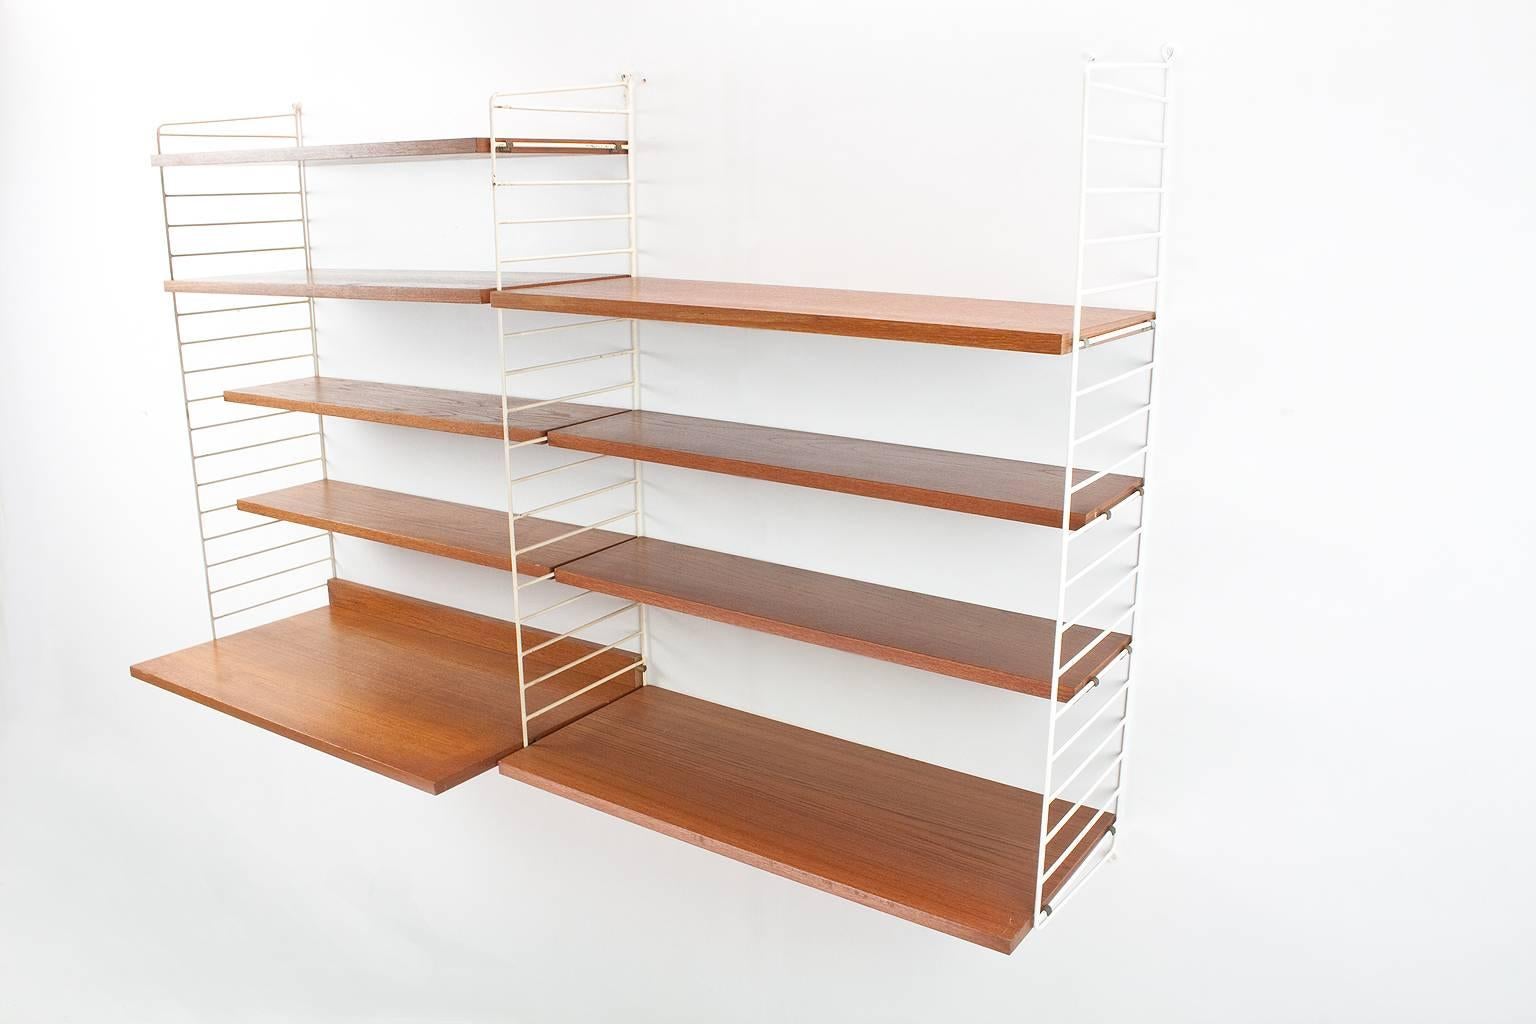 This 1960s teak (veneer) Swedish modular wall system by Nils (Nisse) strinning is in original and great condition. The elements can be placed in different heights on the brackets. Only little patina on the shelves conforming age; and as shown on